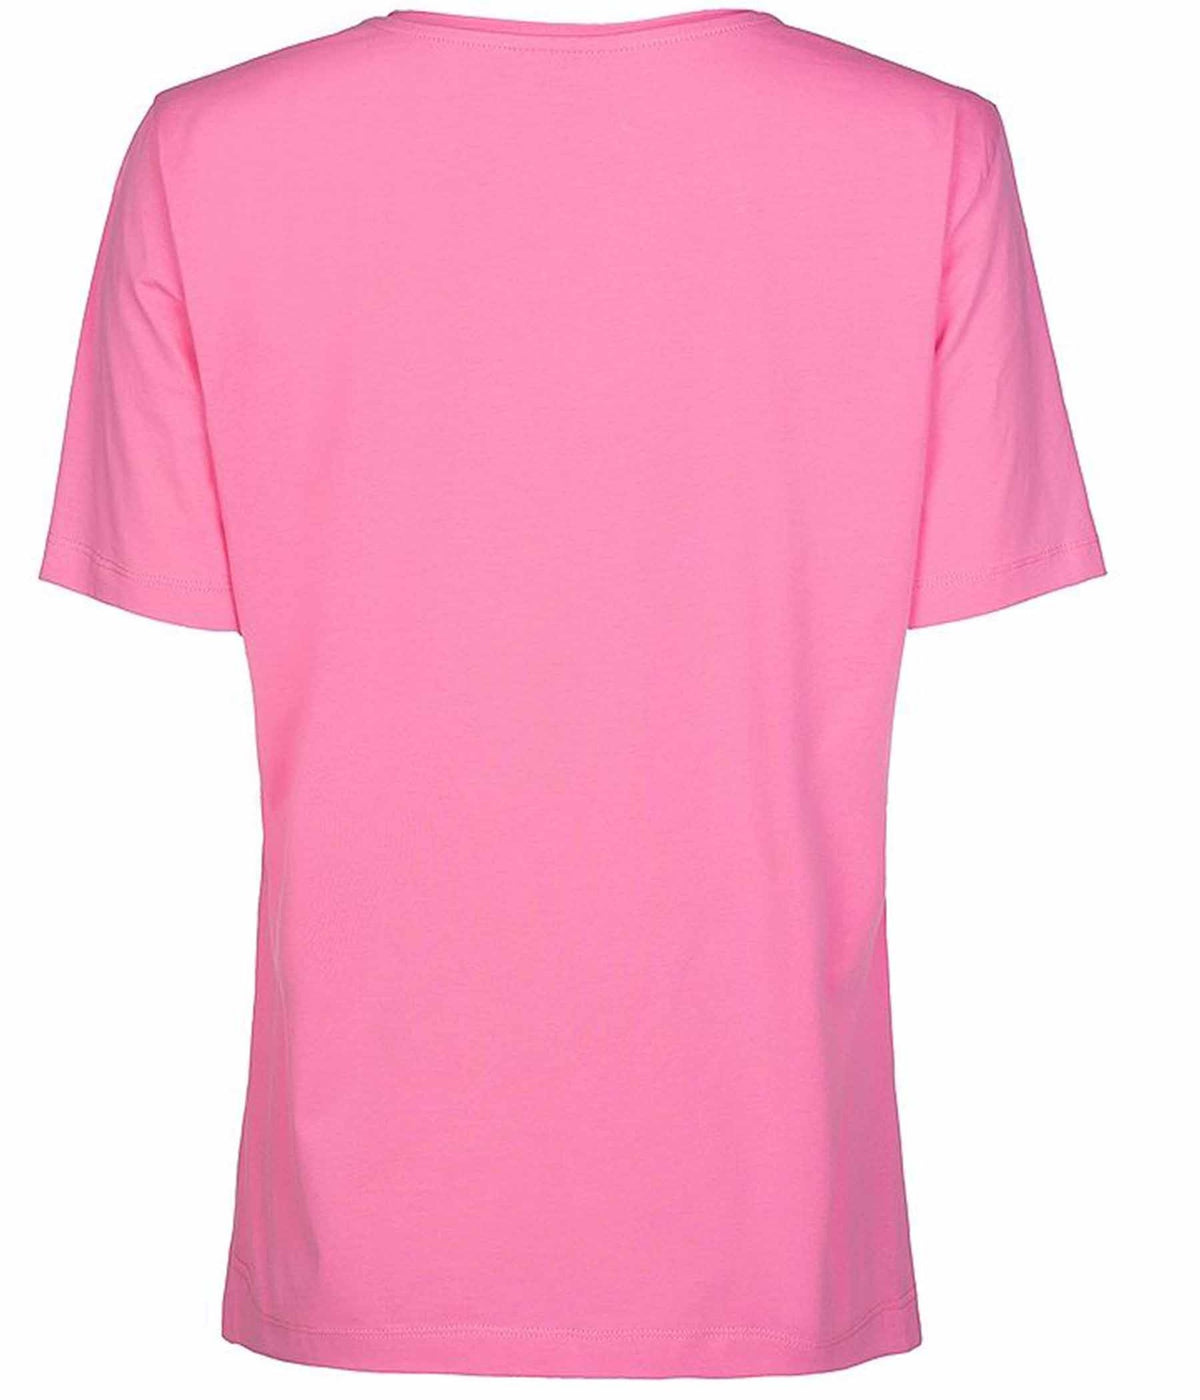 ONE-TWO ELA T-SHIRT I CANDY PINK